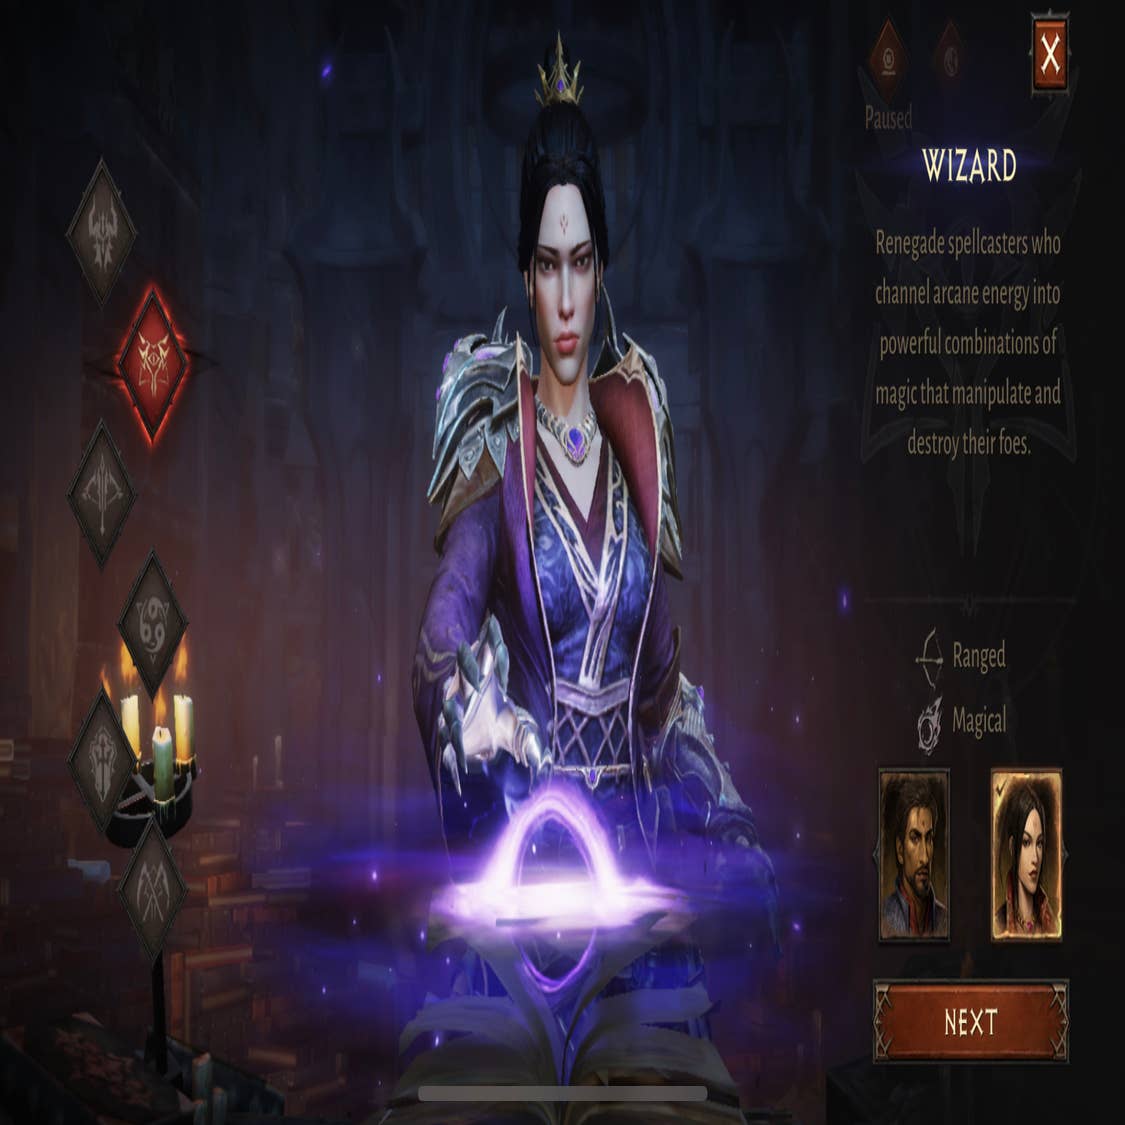 Diablo Immortal Class Guide - Which Class Suits Your Playstyles? - QooApp  Guide